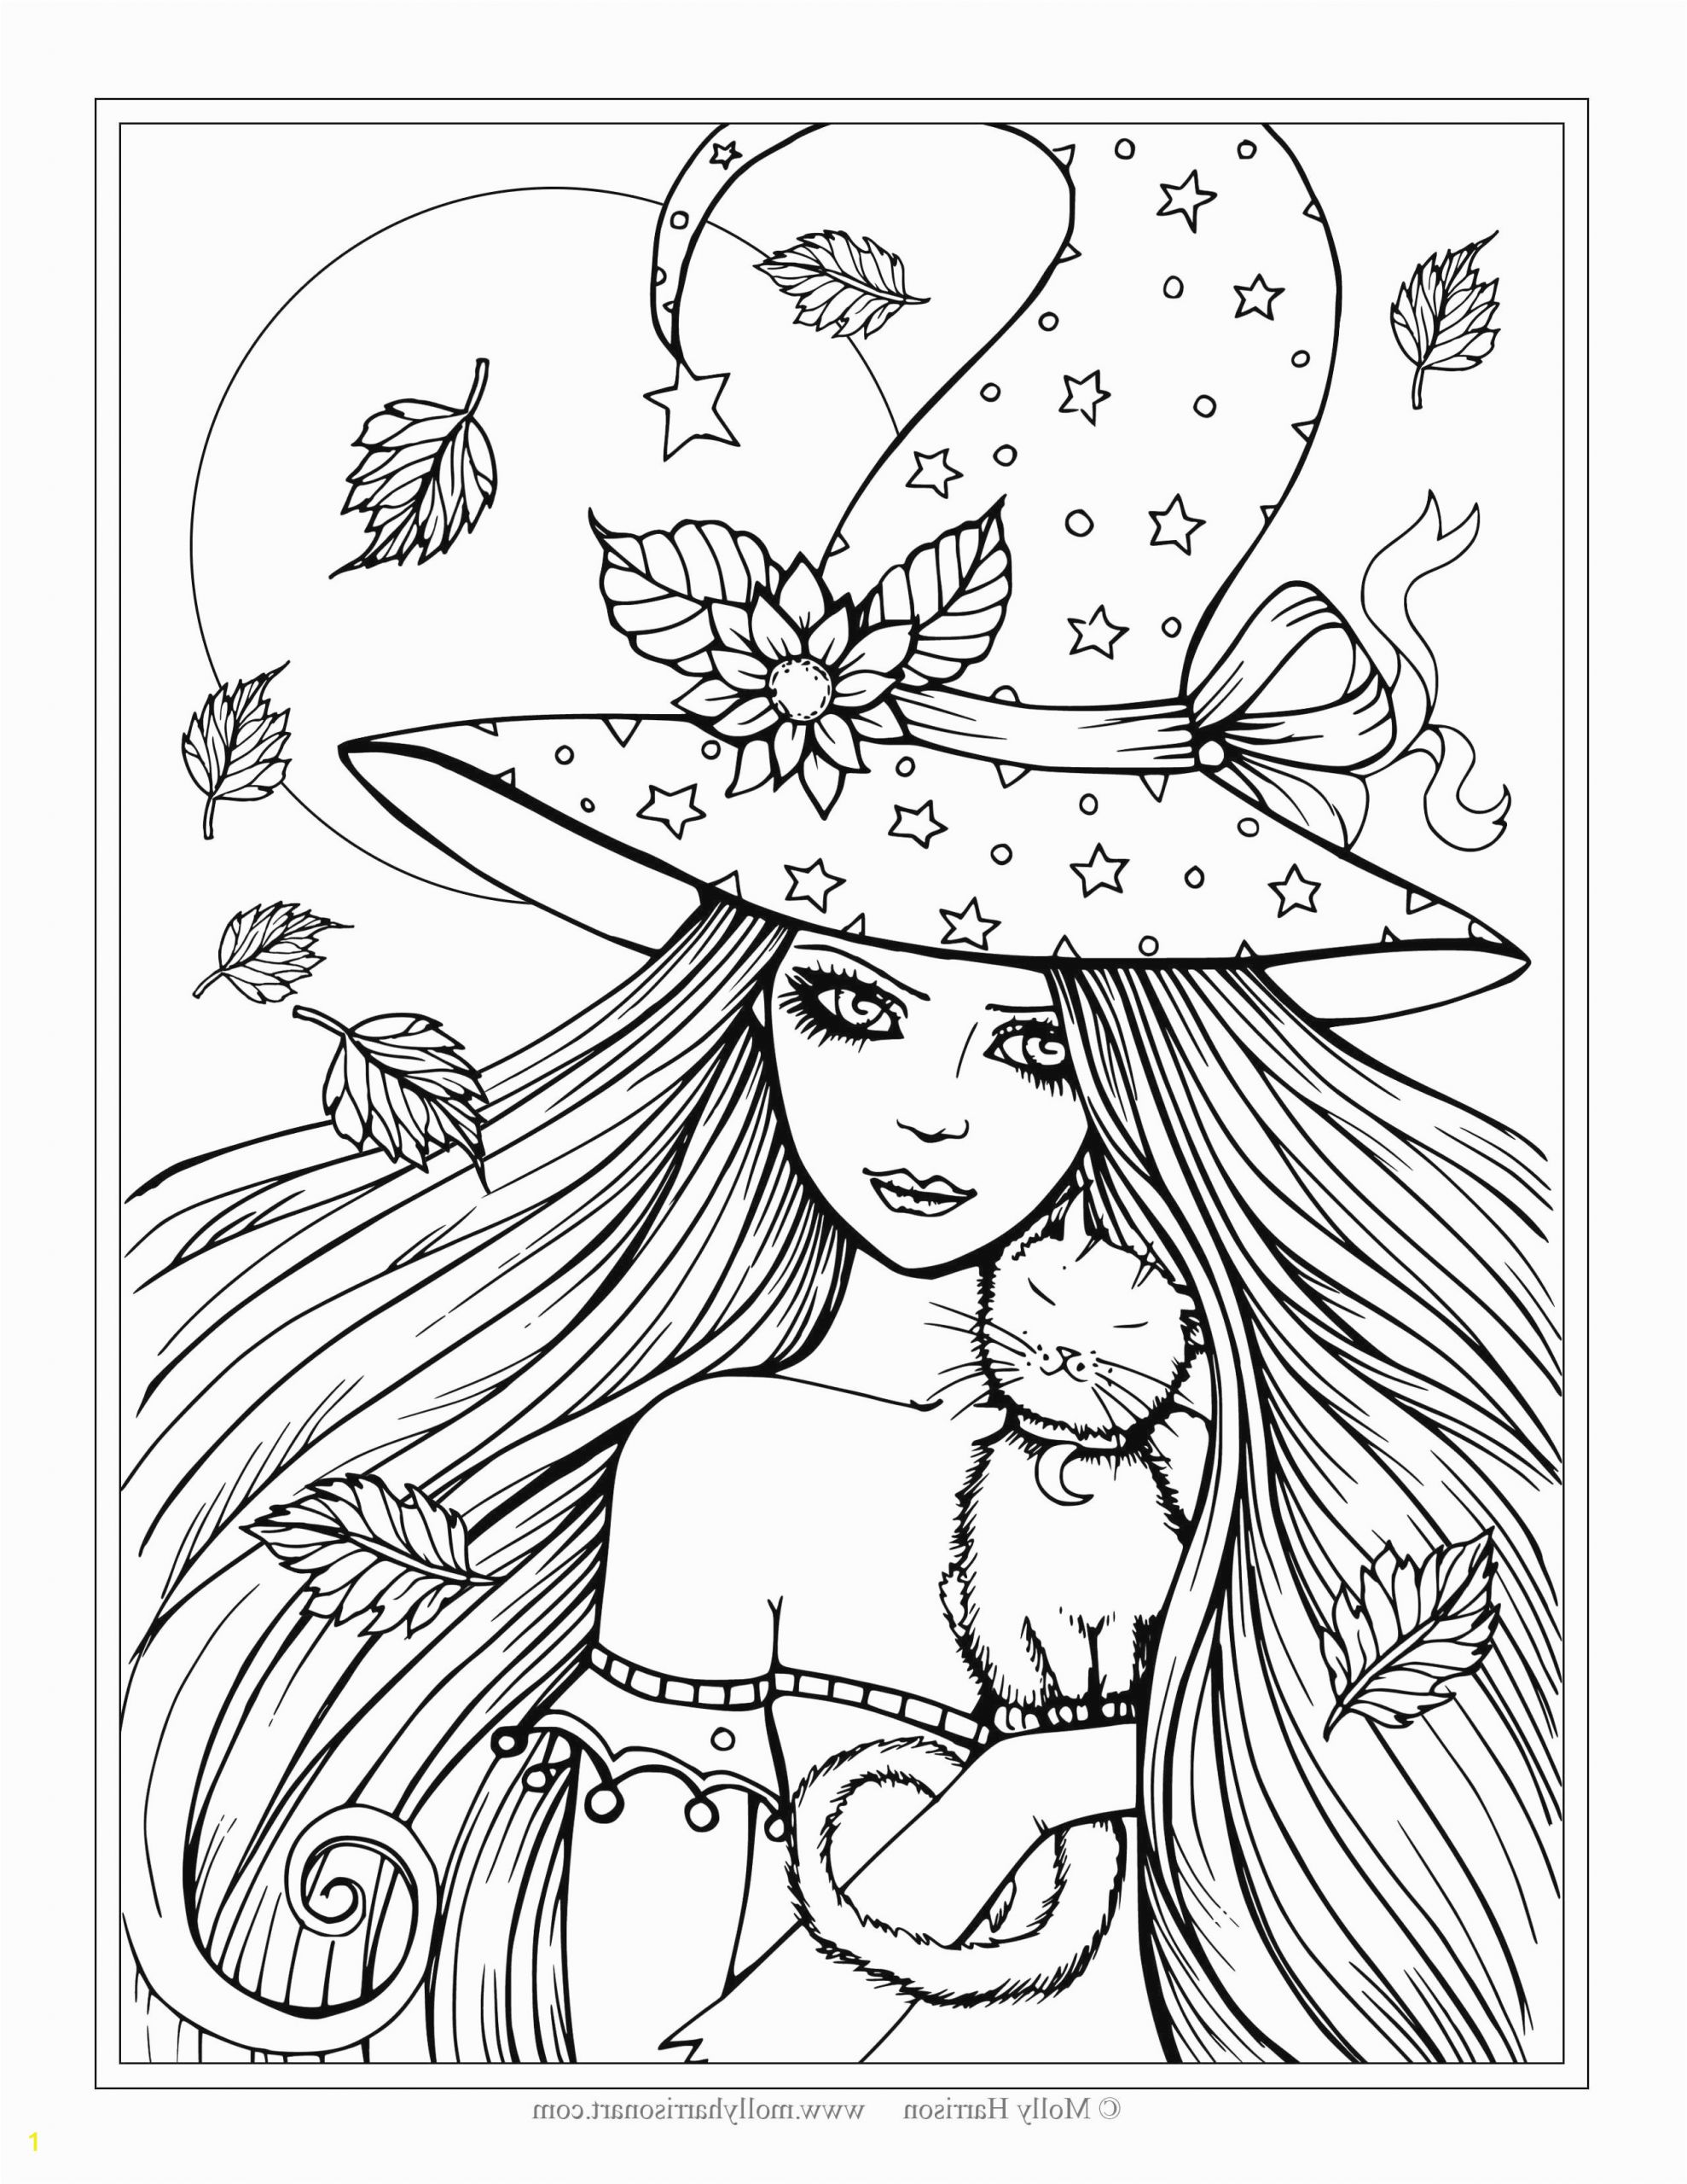 Free 2019 Coloring Pages Valentines Free Coloring Page Beautiful Gallery Mario Color